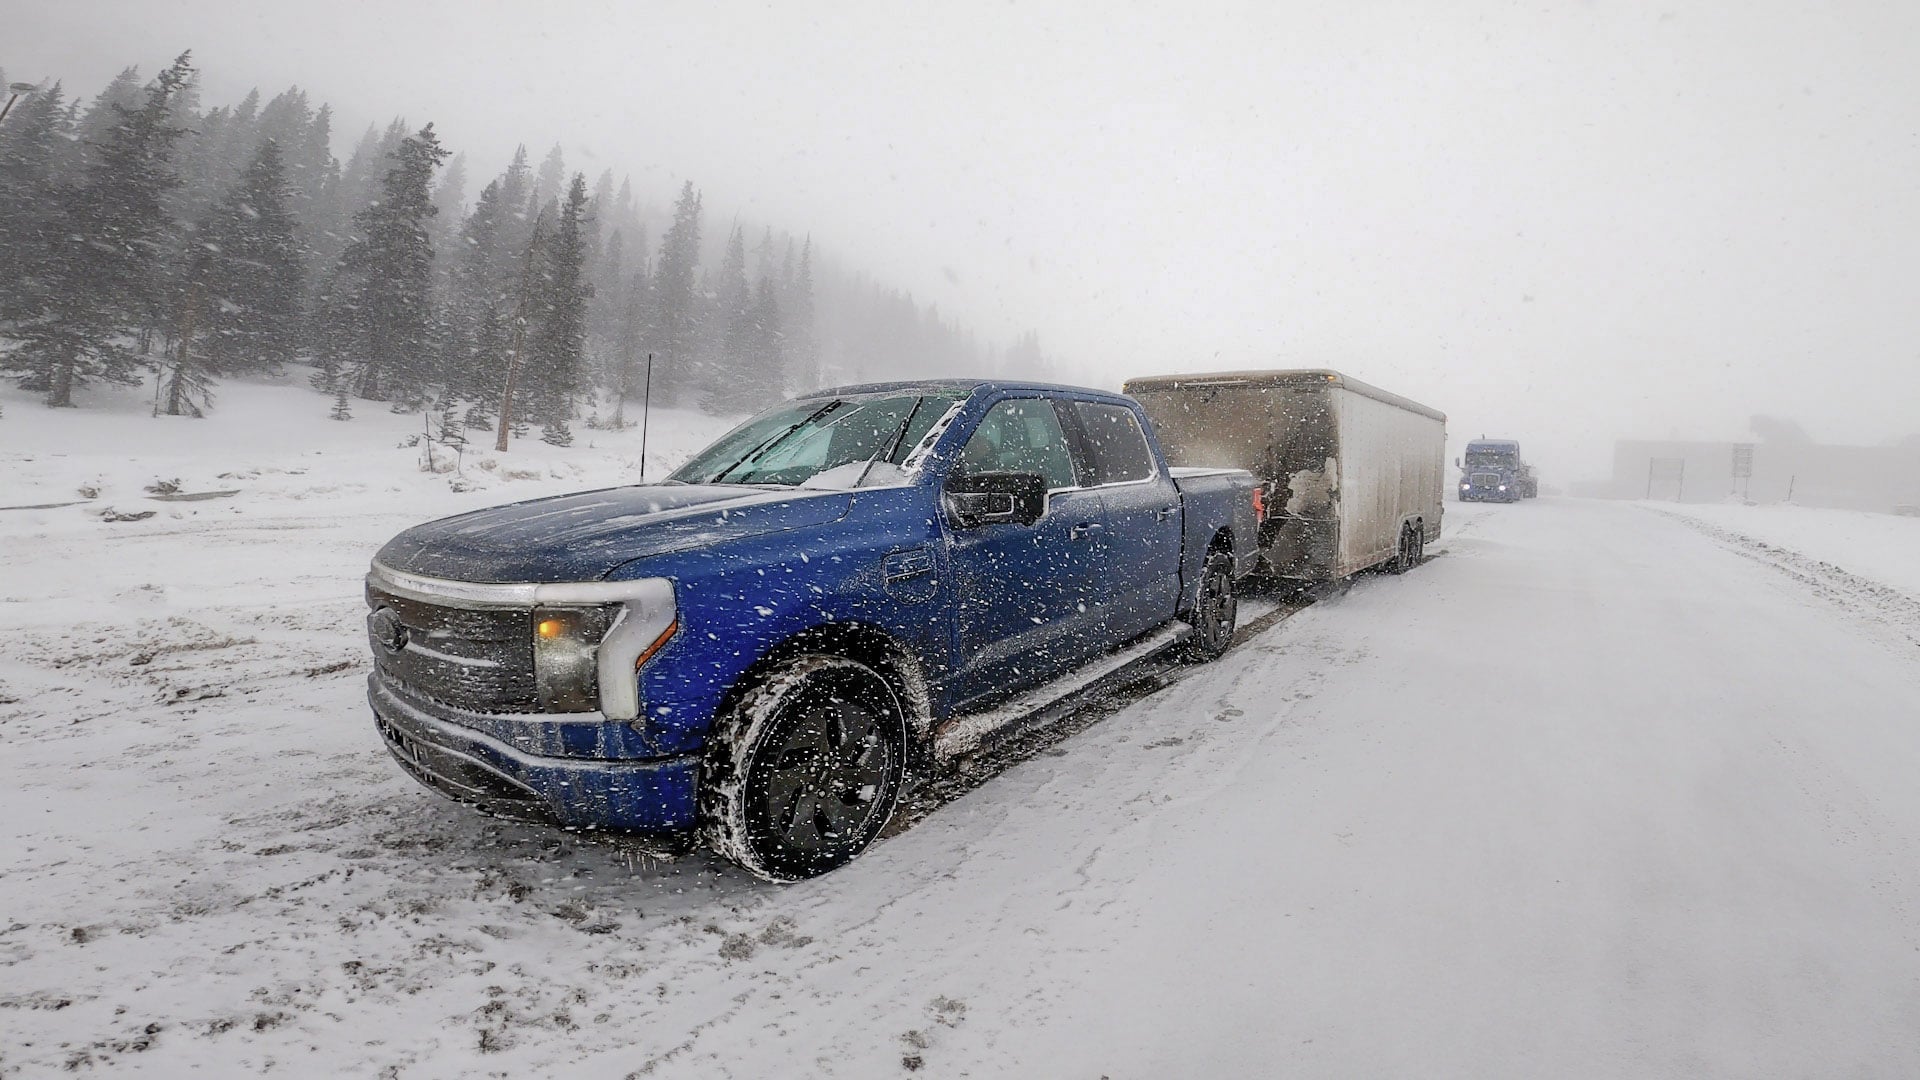 F-150 Lightning Tows 10,000 Pounds Up Colorado’s I-70 On Coldest February Day In Boulder In 123 Years, Davis Dam In Triple Digit Heat